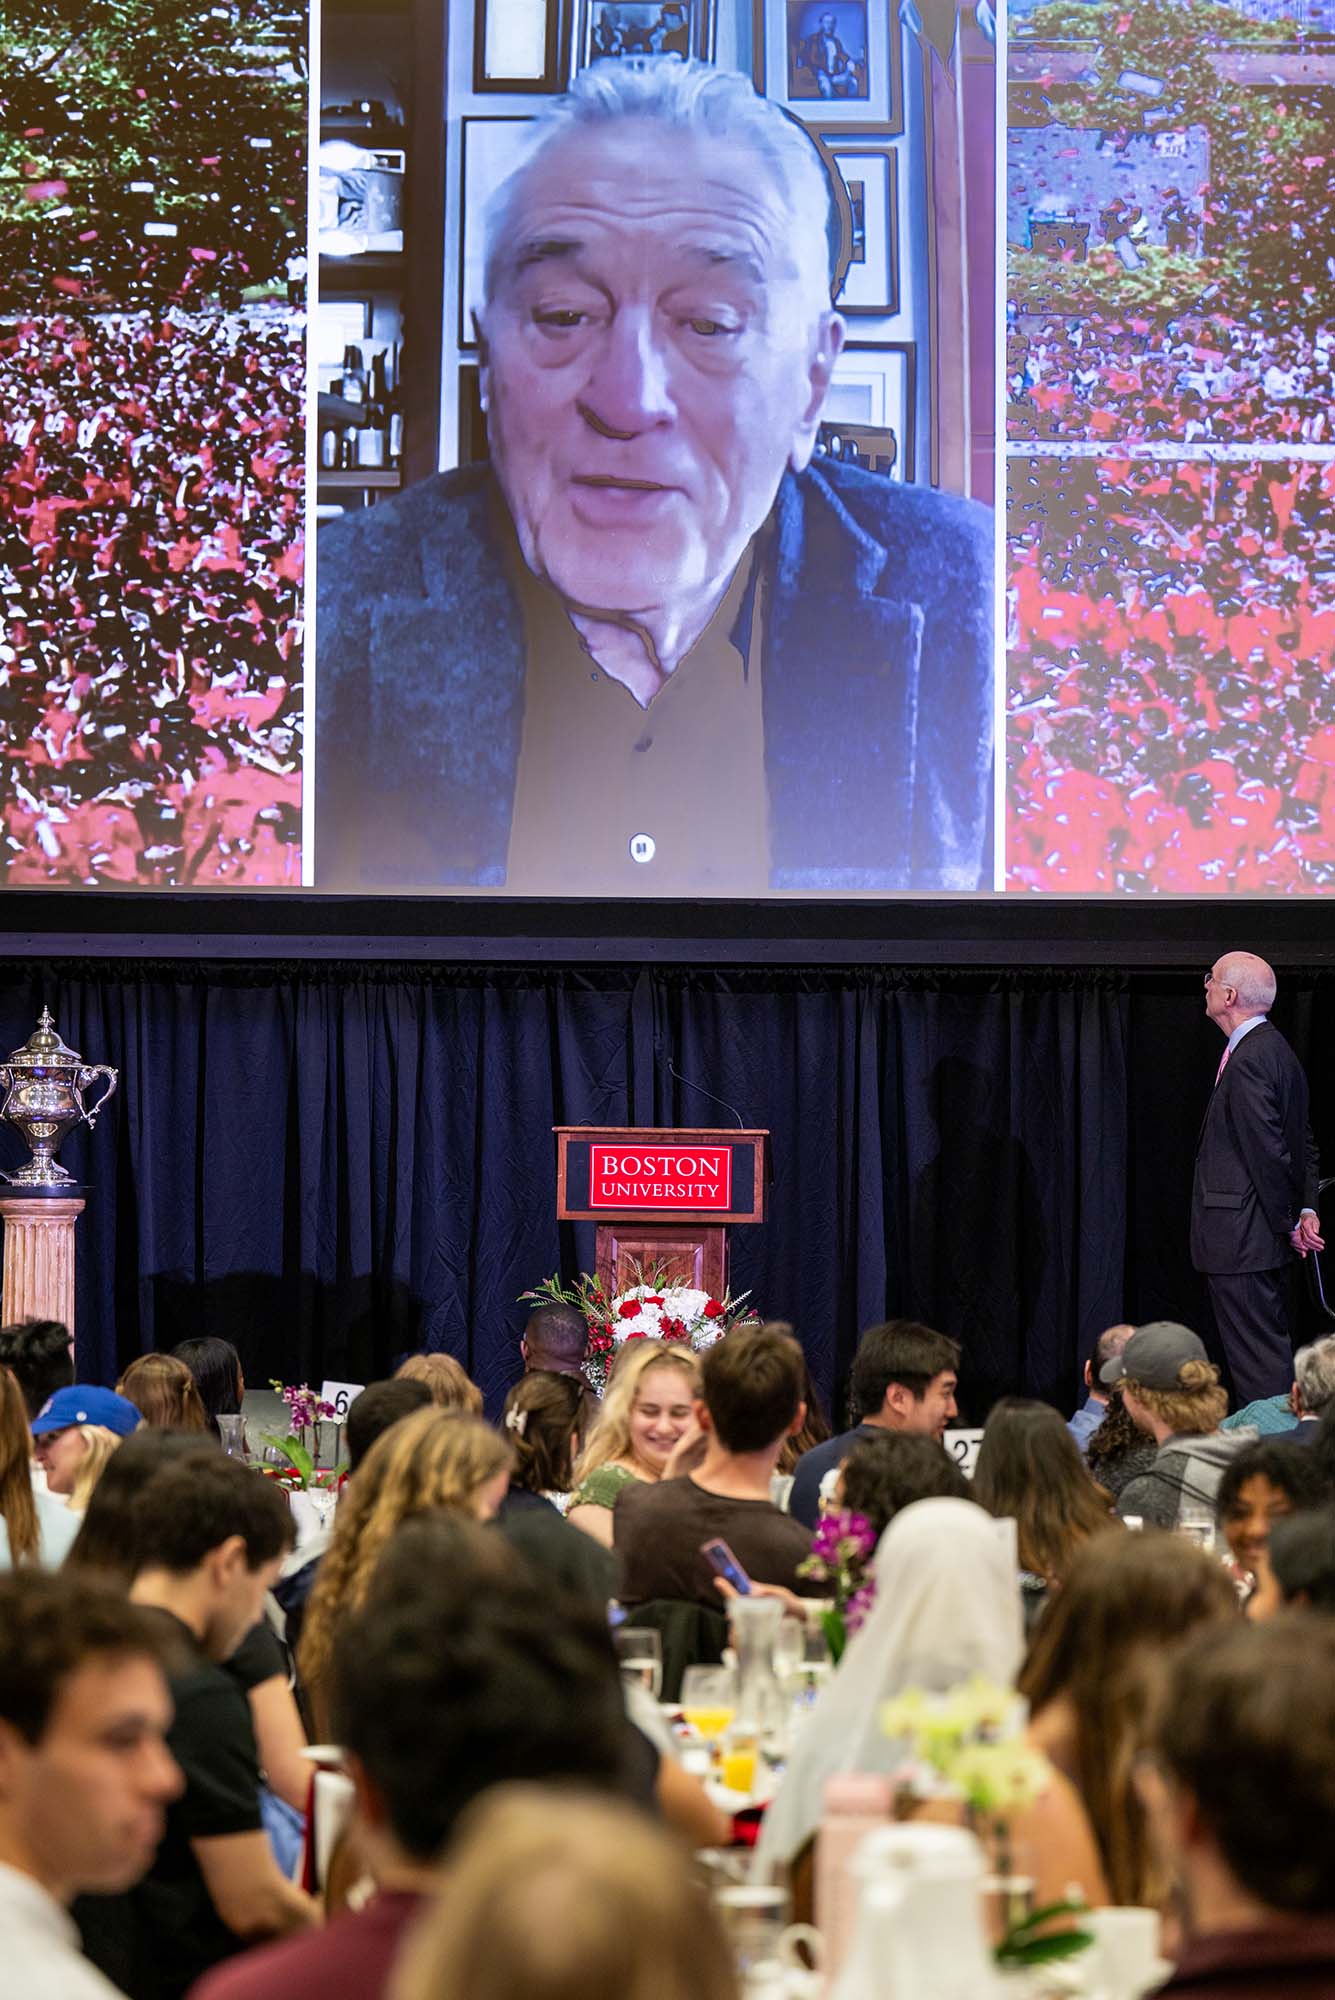 Photo: A picture of a crowd watching a video of Robert De Niro on a projector screen